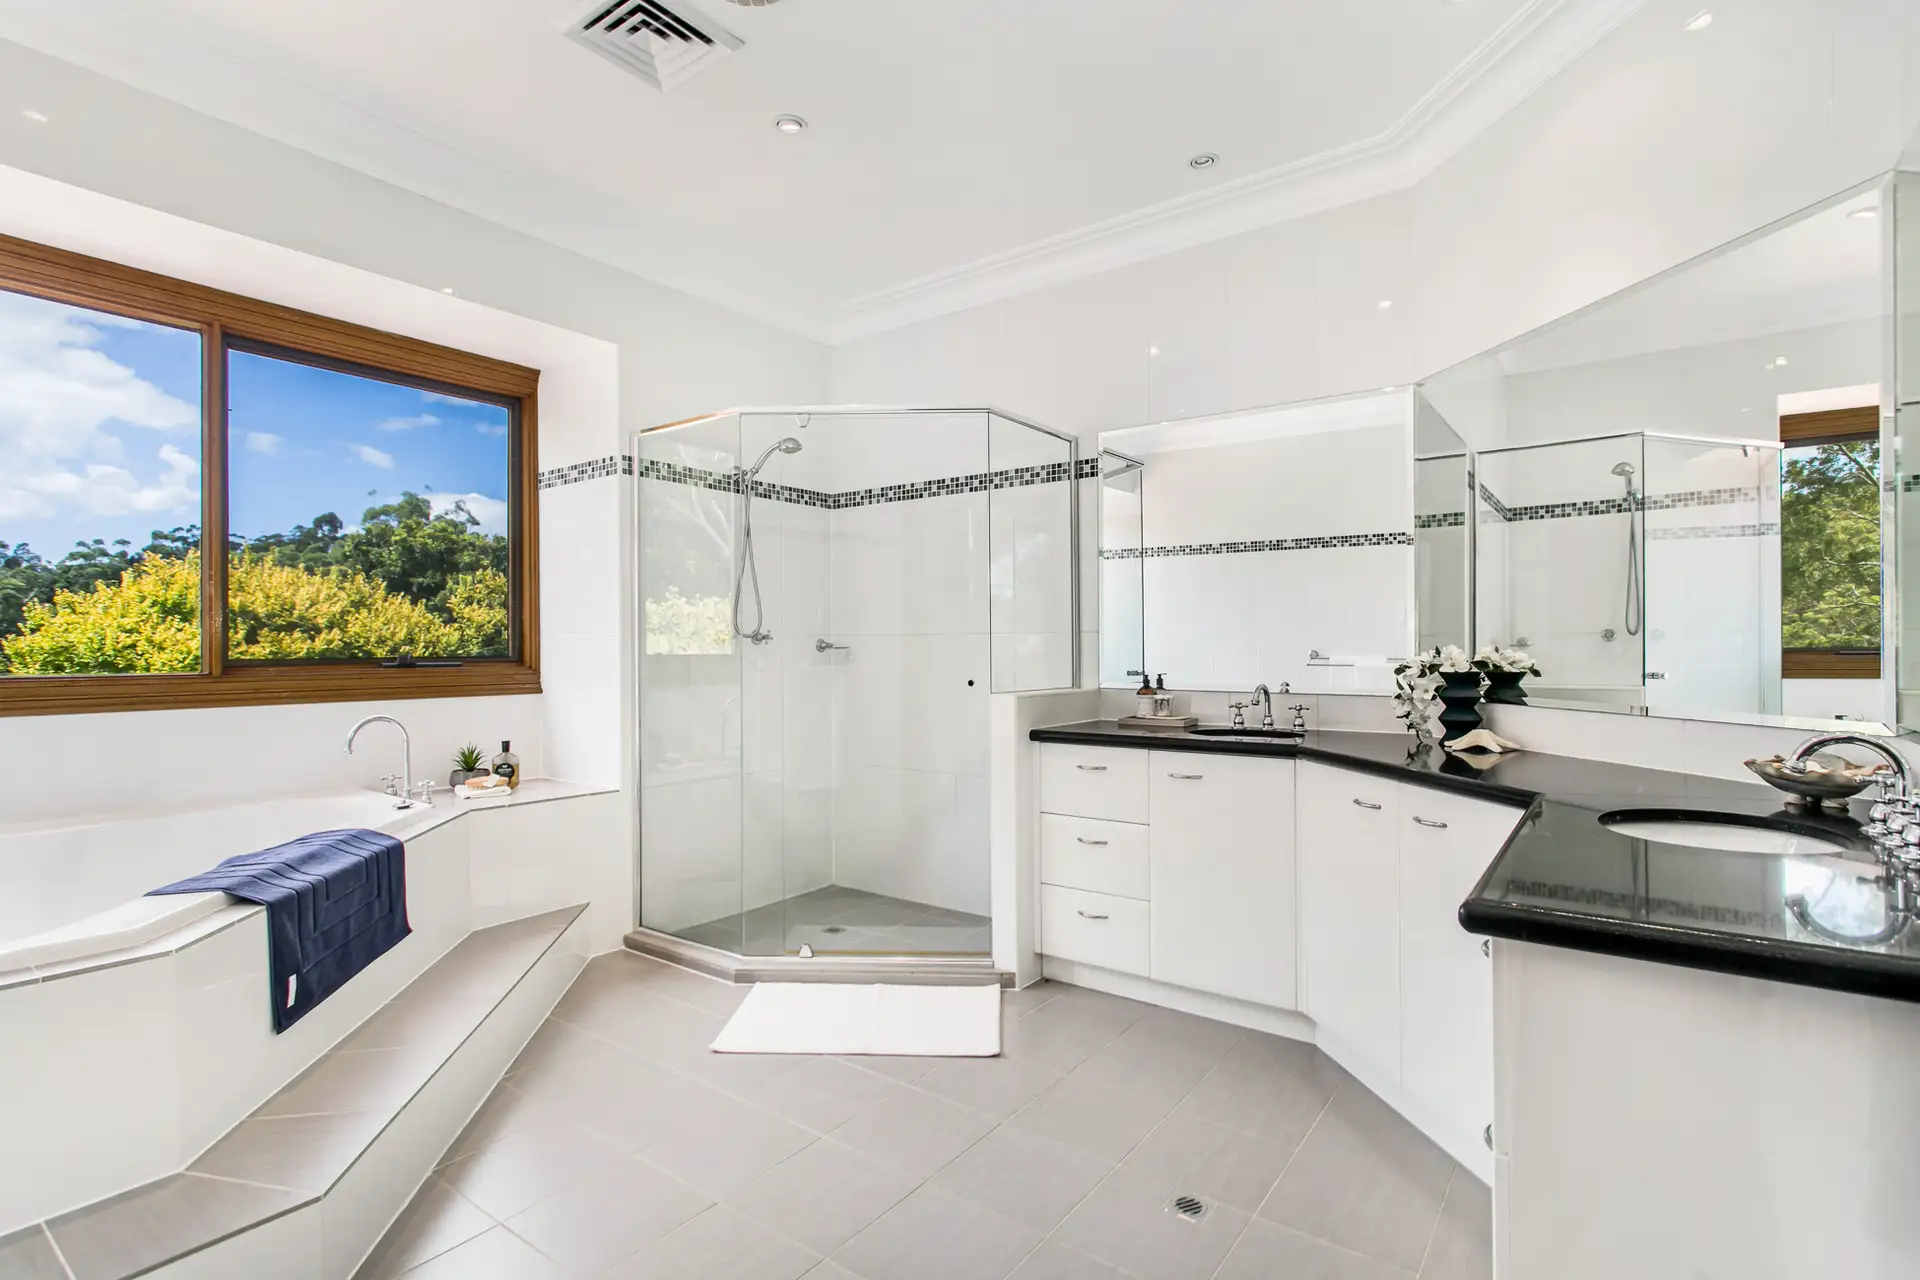 Photo #13: 21 And 23 Jacana Place, West Pennant Hills - Sold by Louis Carr Real Estate